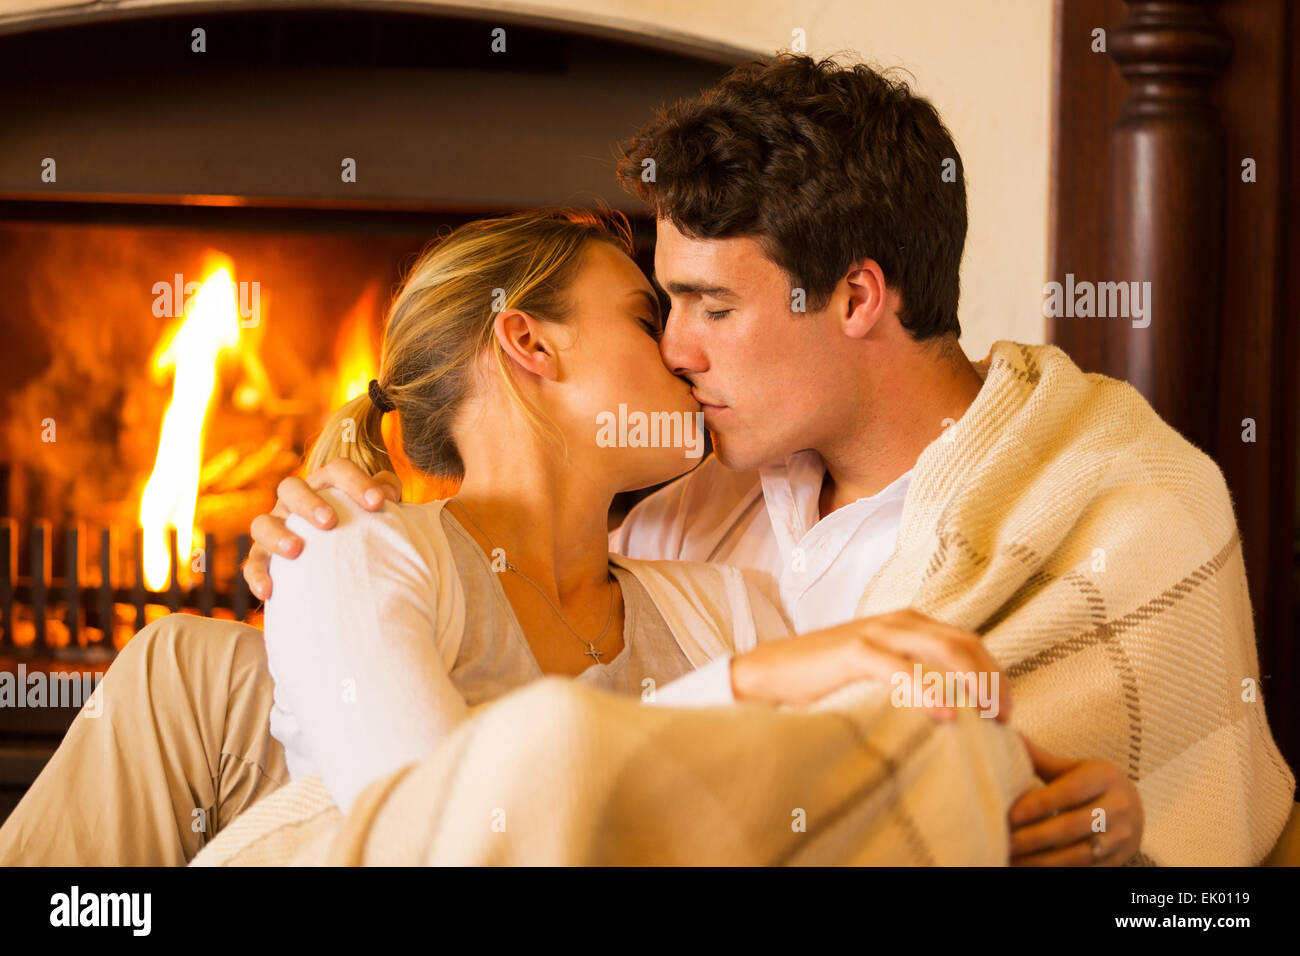 Couple Makes Passionate Love By The Fireplace